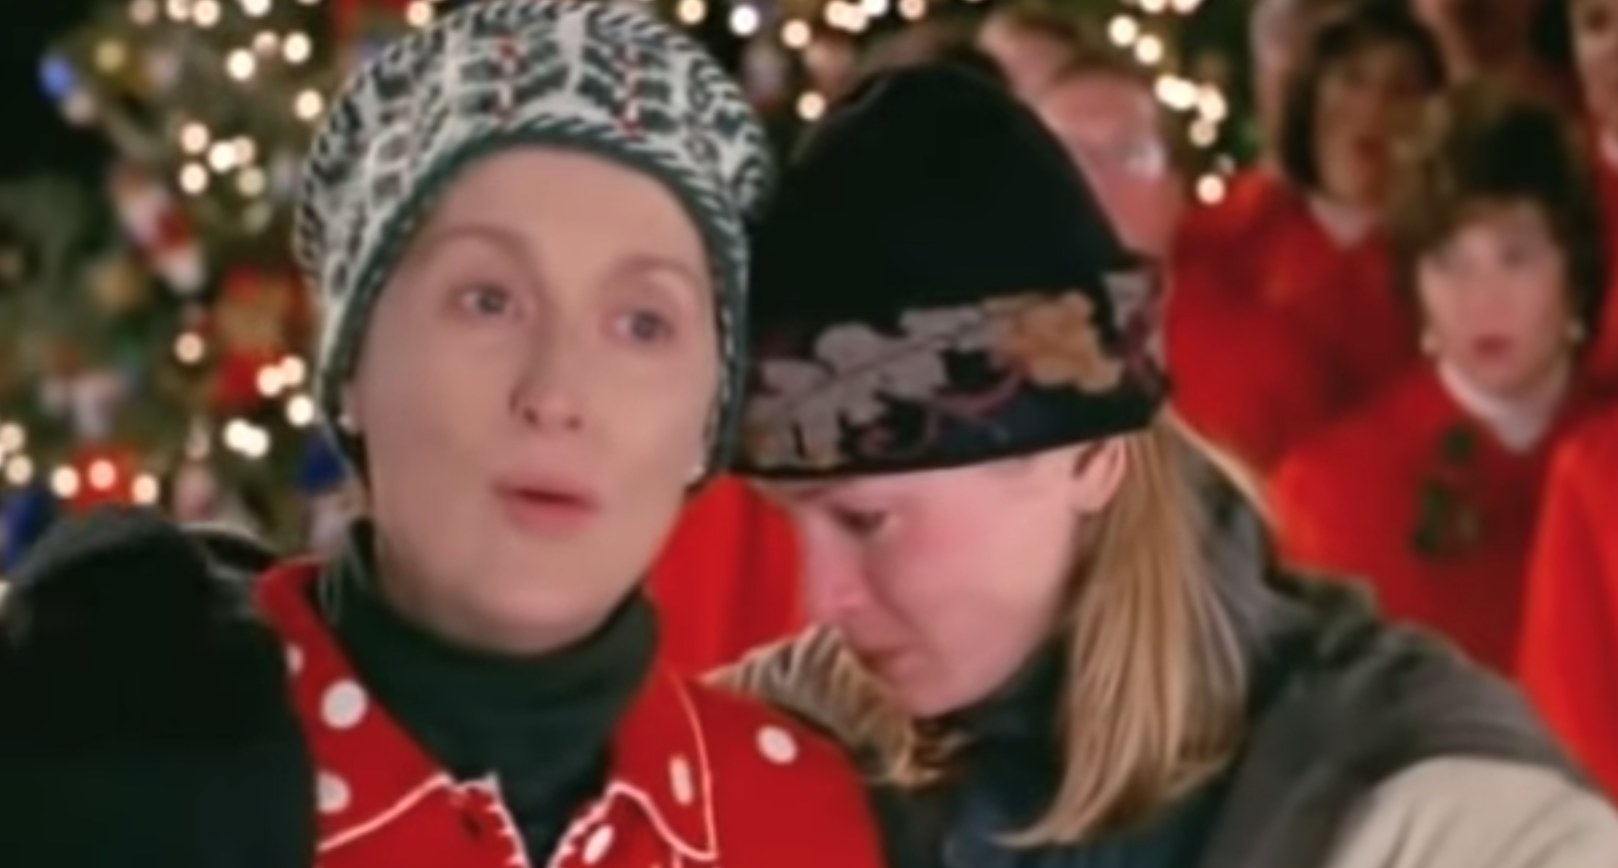 Two women at Christmas time played by Meryl Streep and Renee Zellweger 